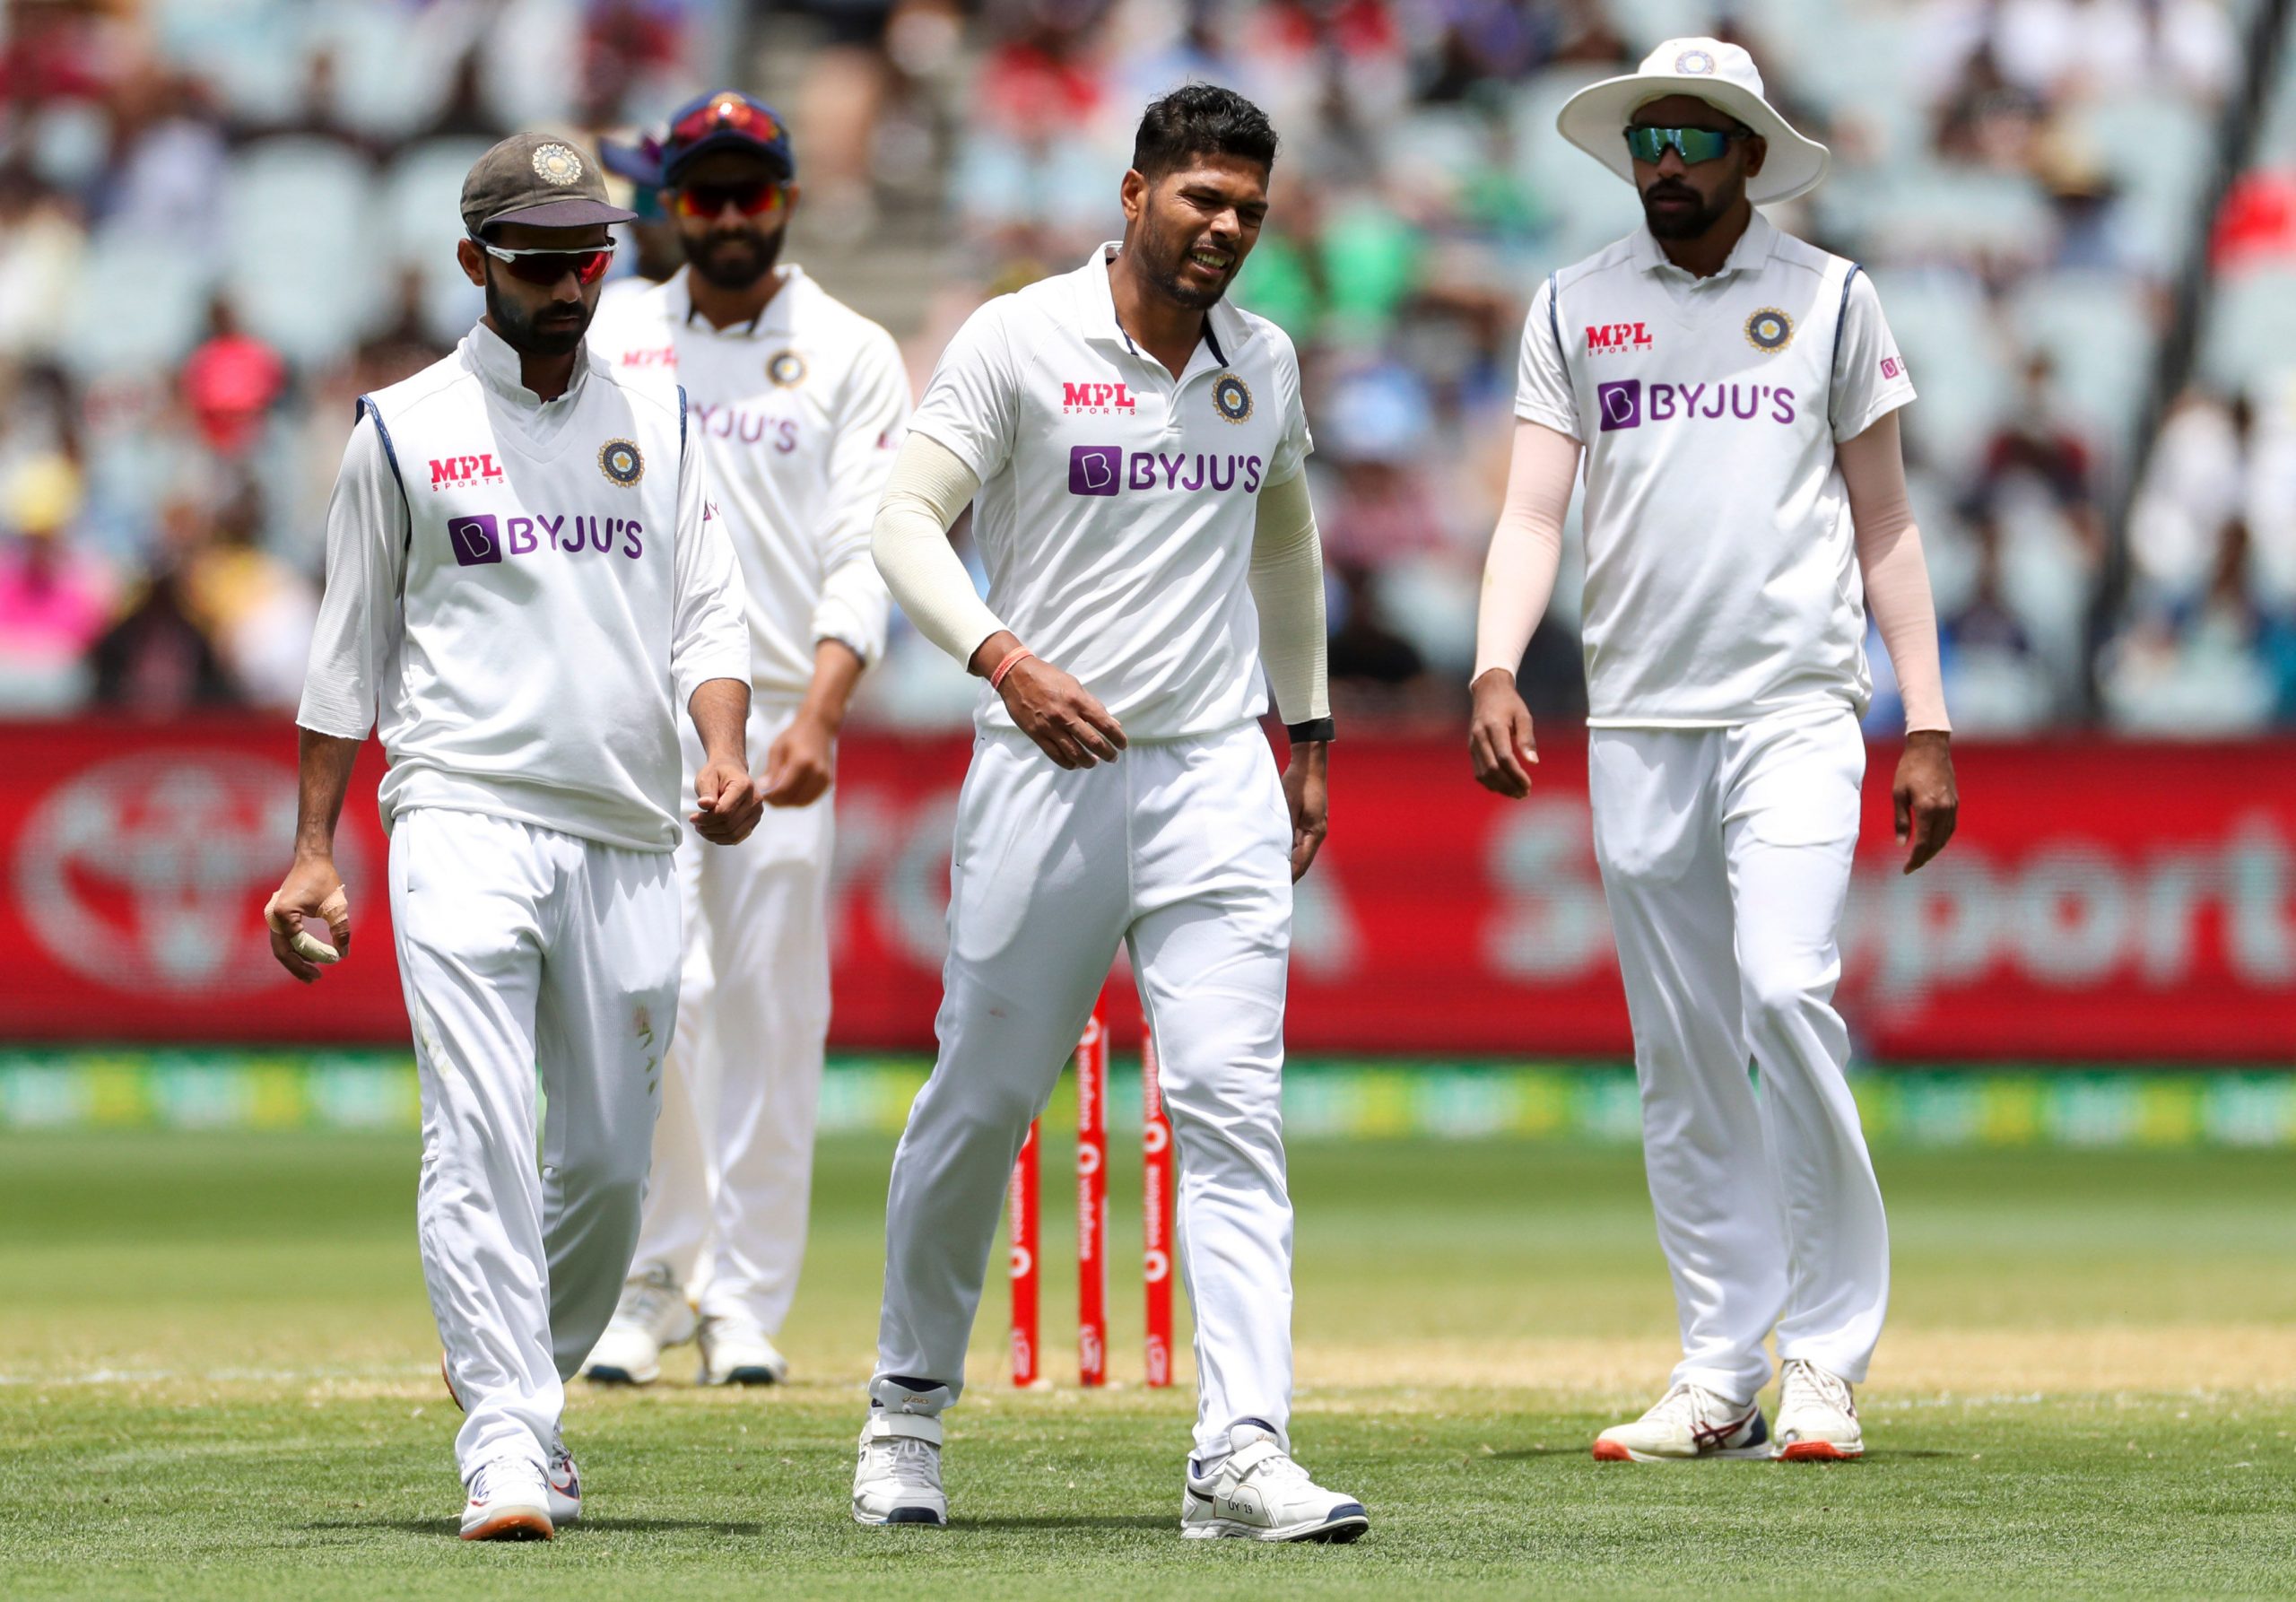 Indian bowlers put up spirited display ahead of Test series against England